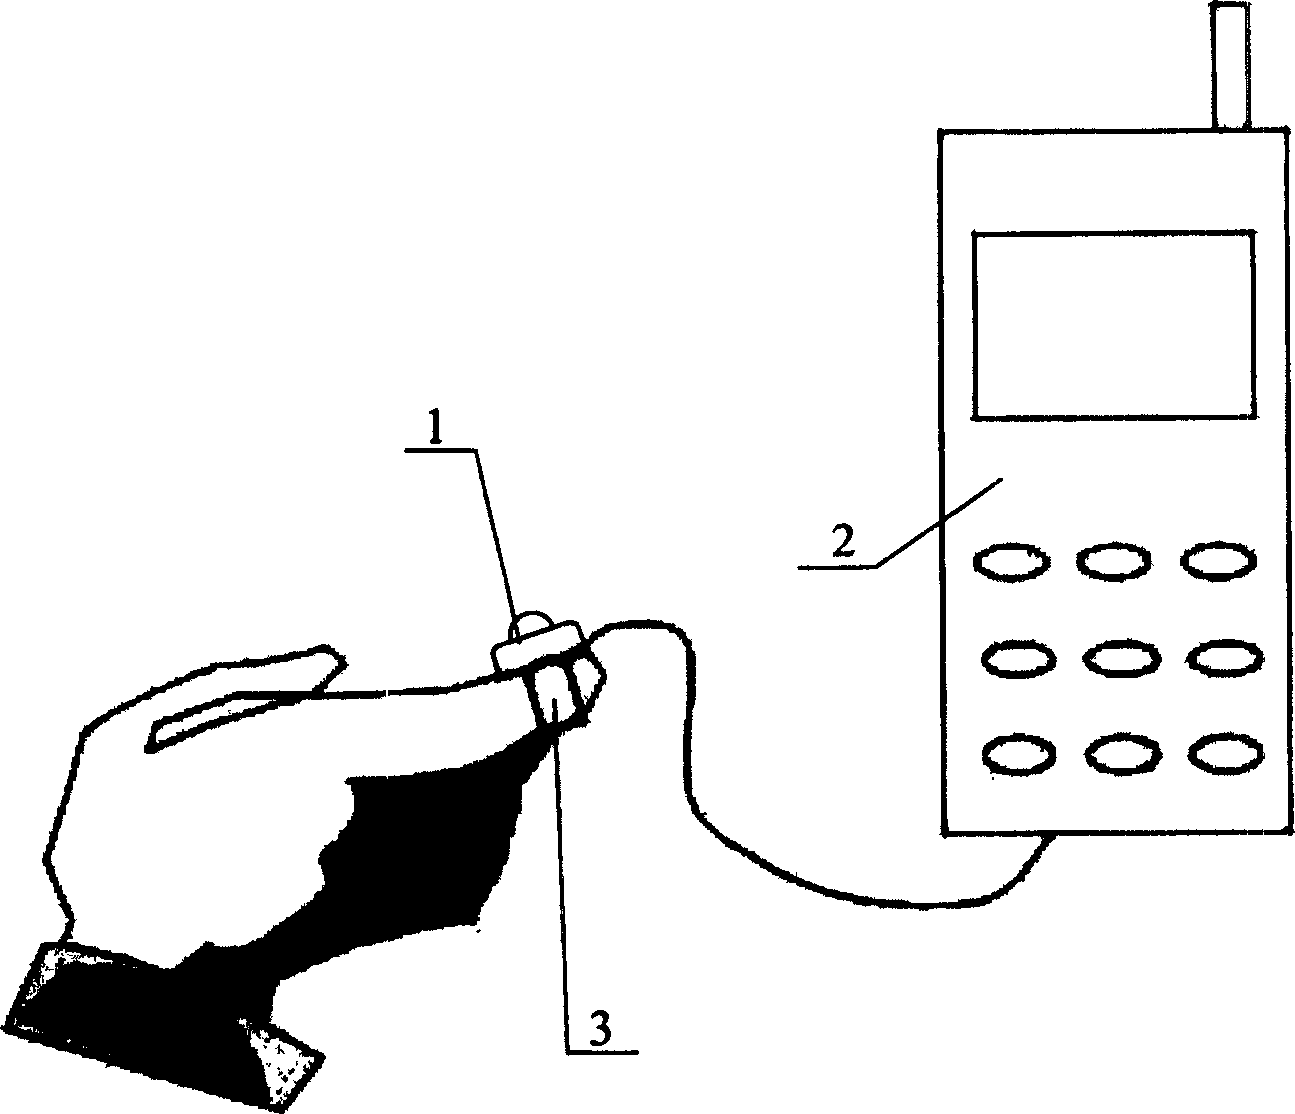 Single finger input system specific for handheld terminals